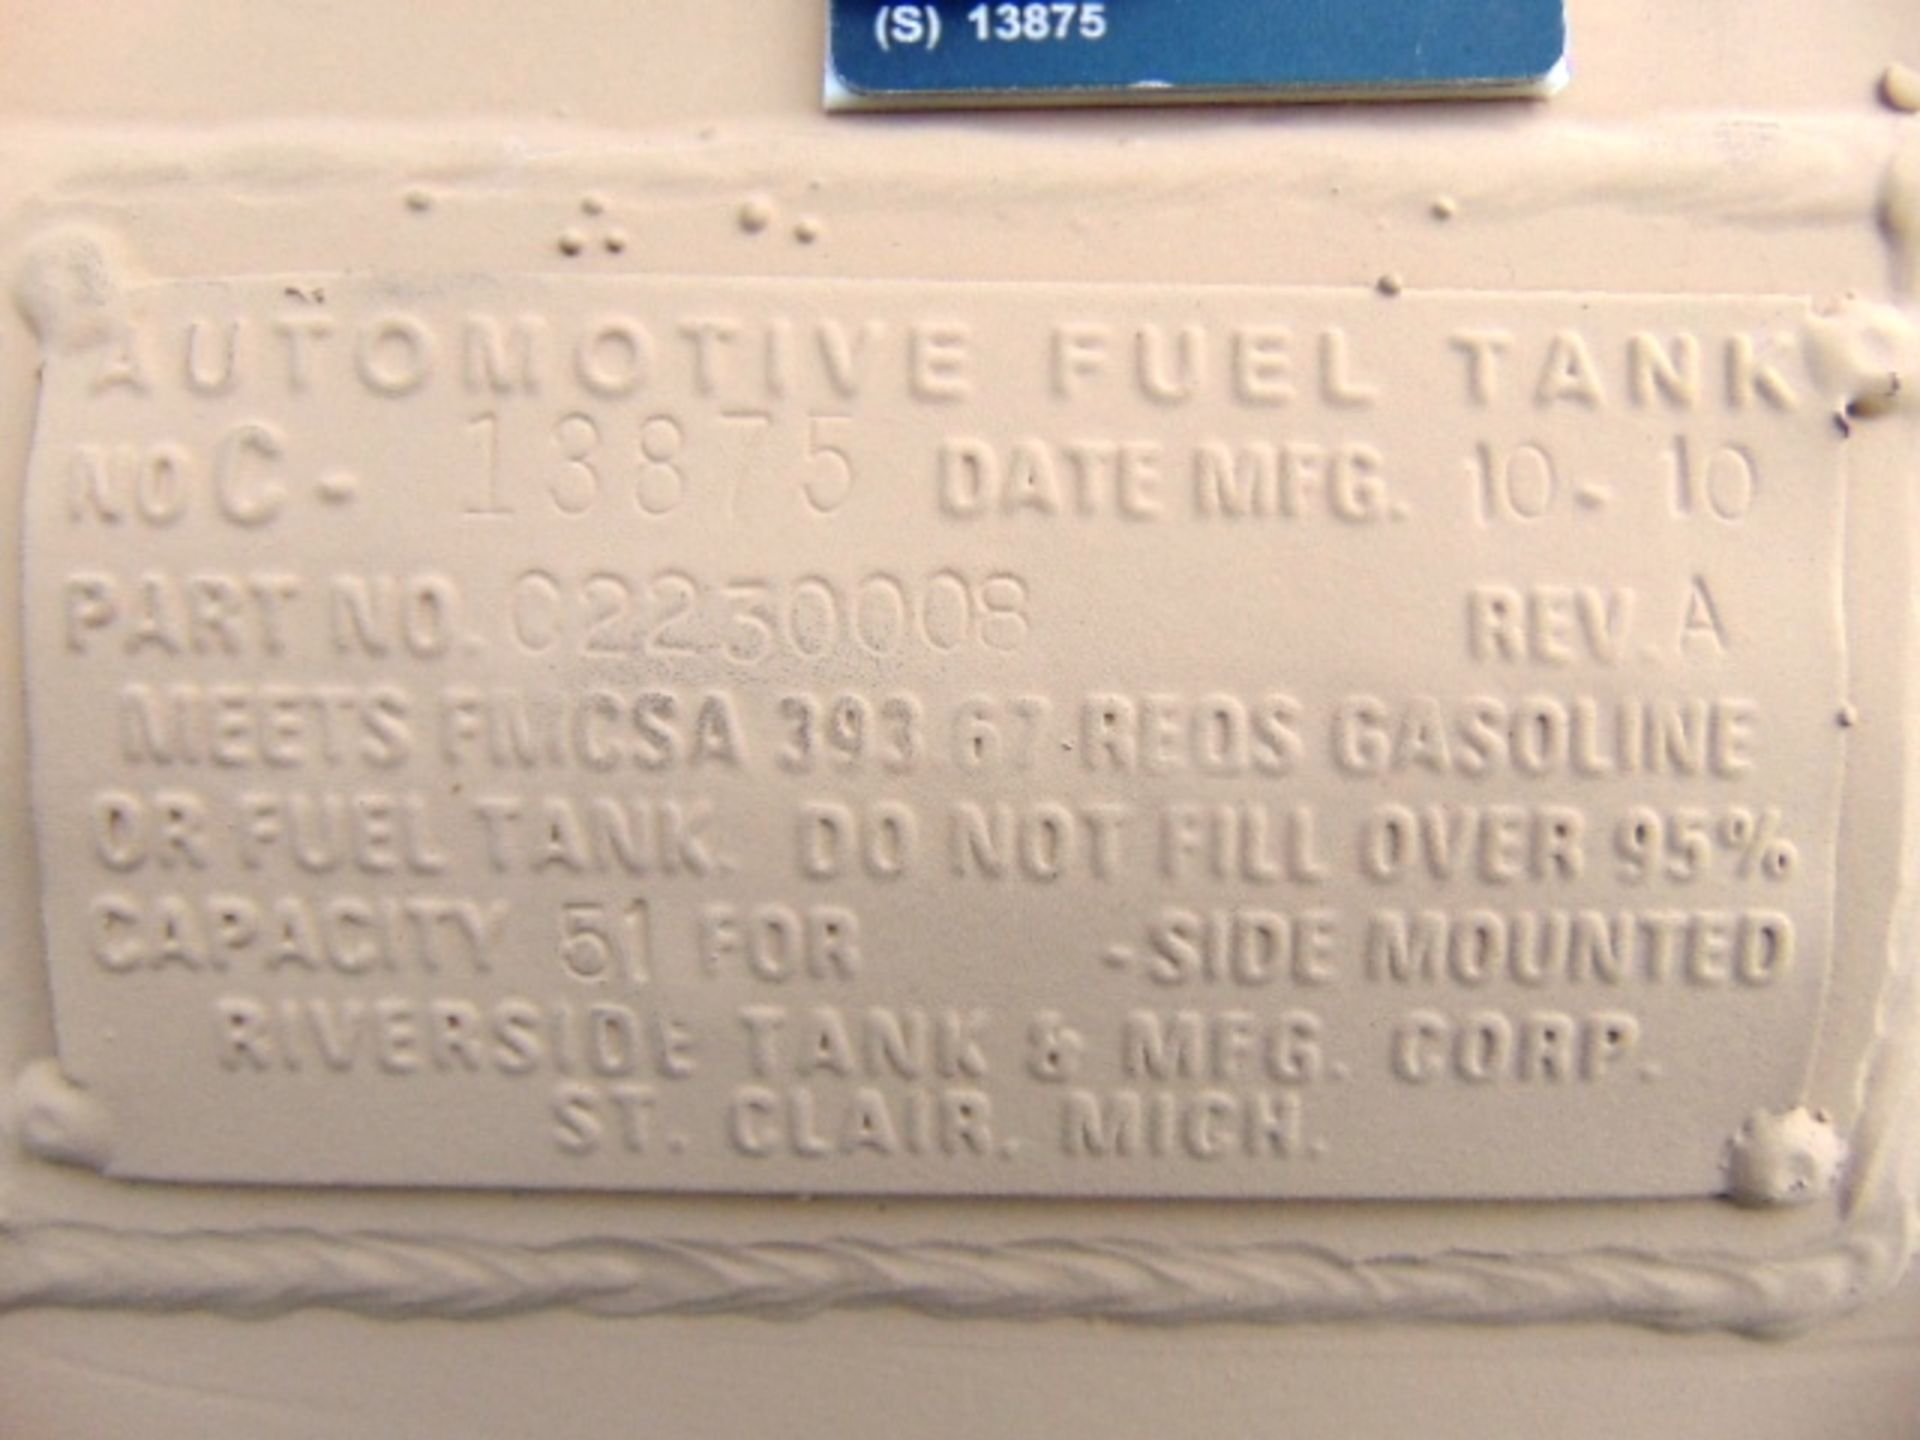 6 x Unissued Heavy Duty Automotive 51 US Gall Fuel Tanks - Image 5 of 6